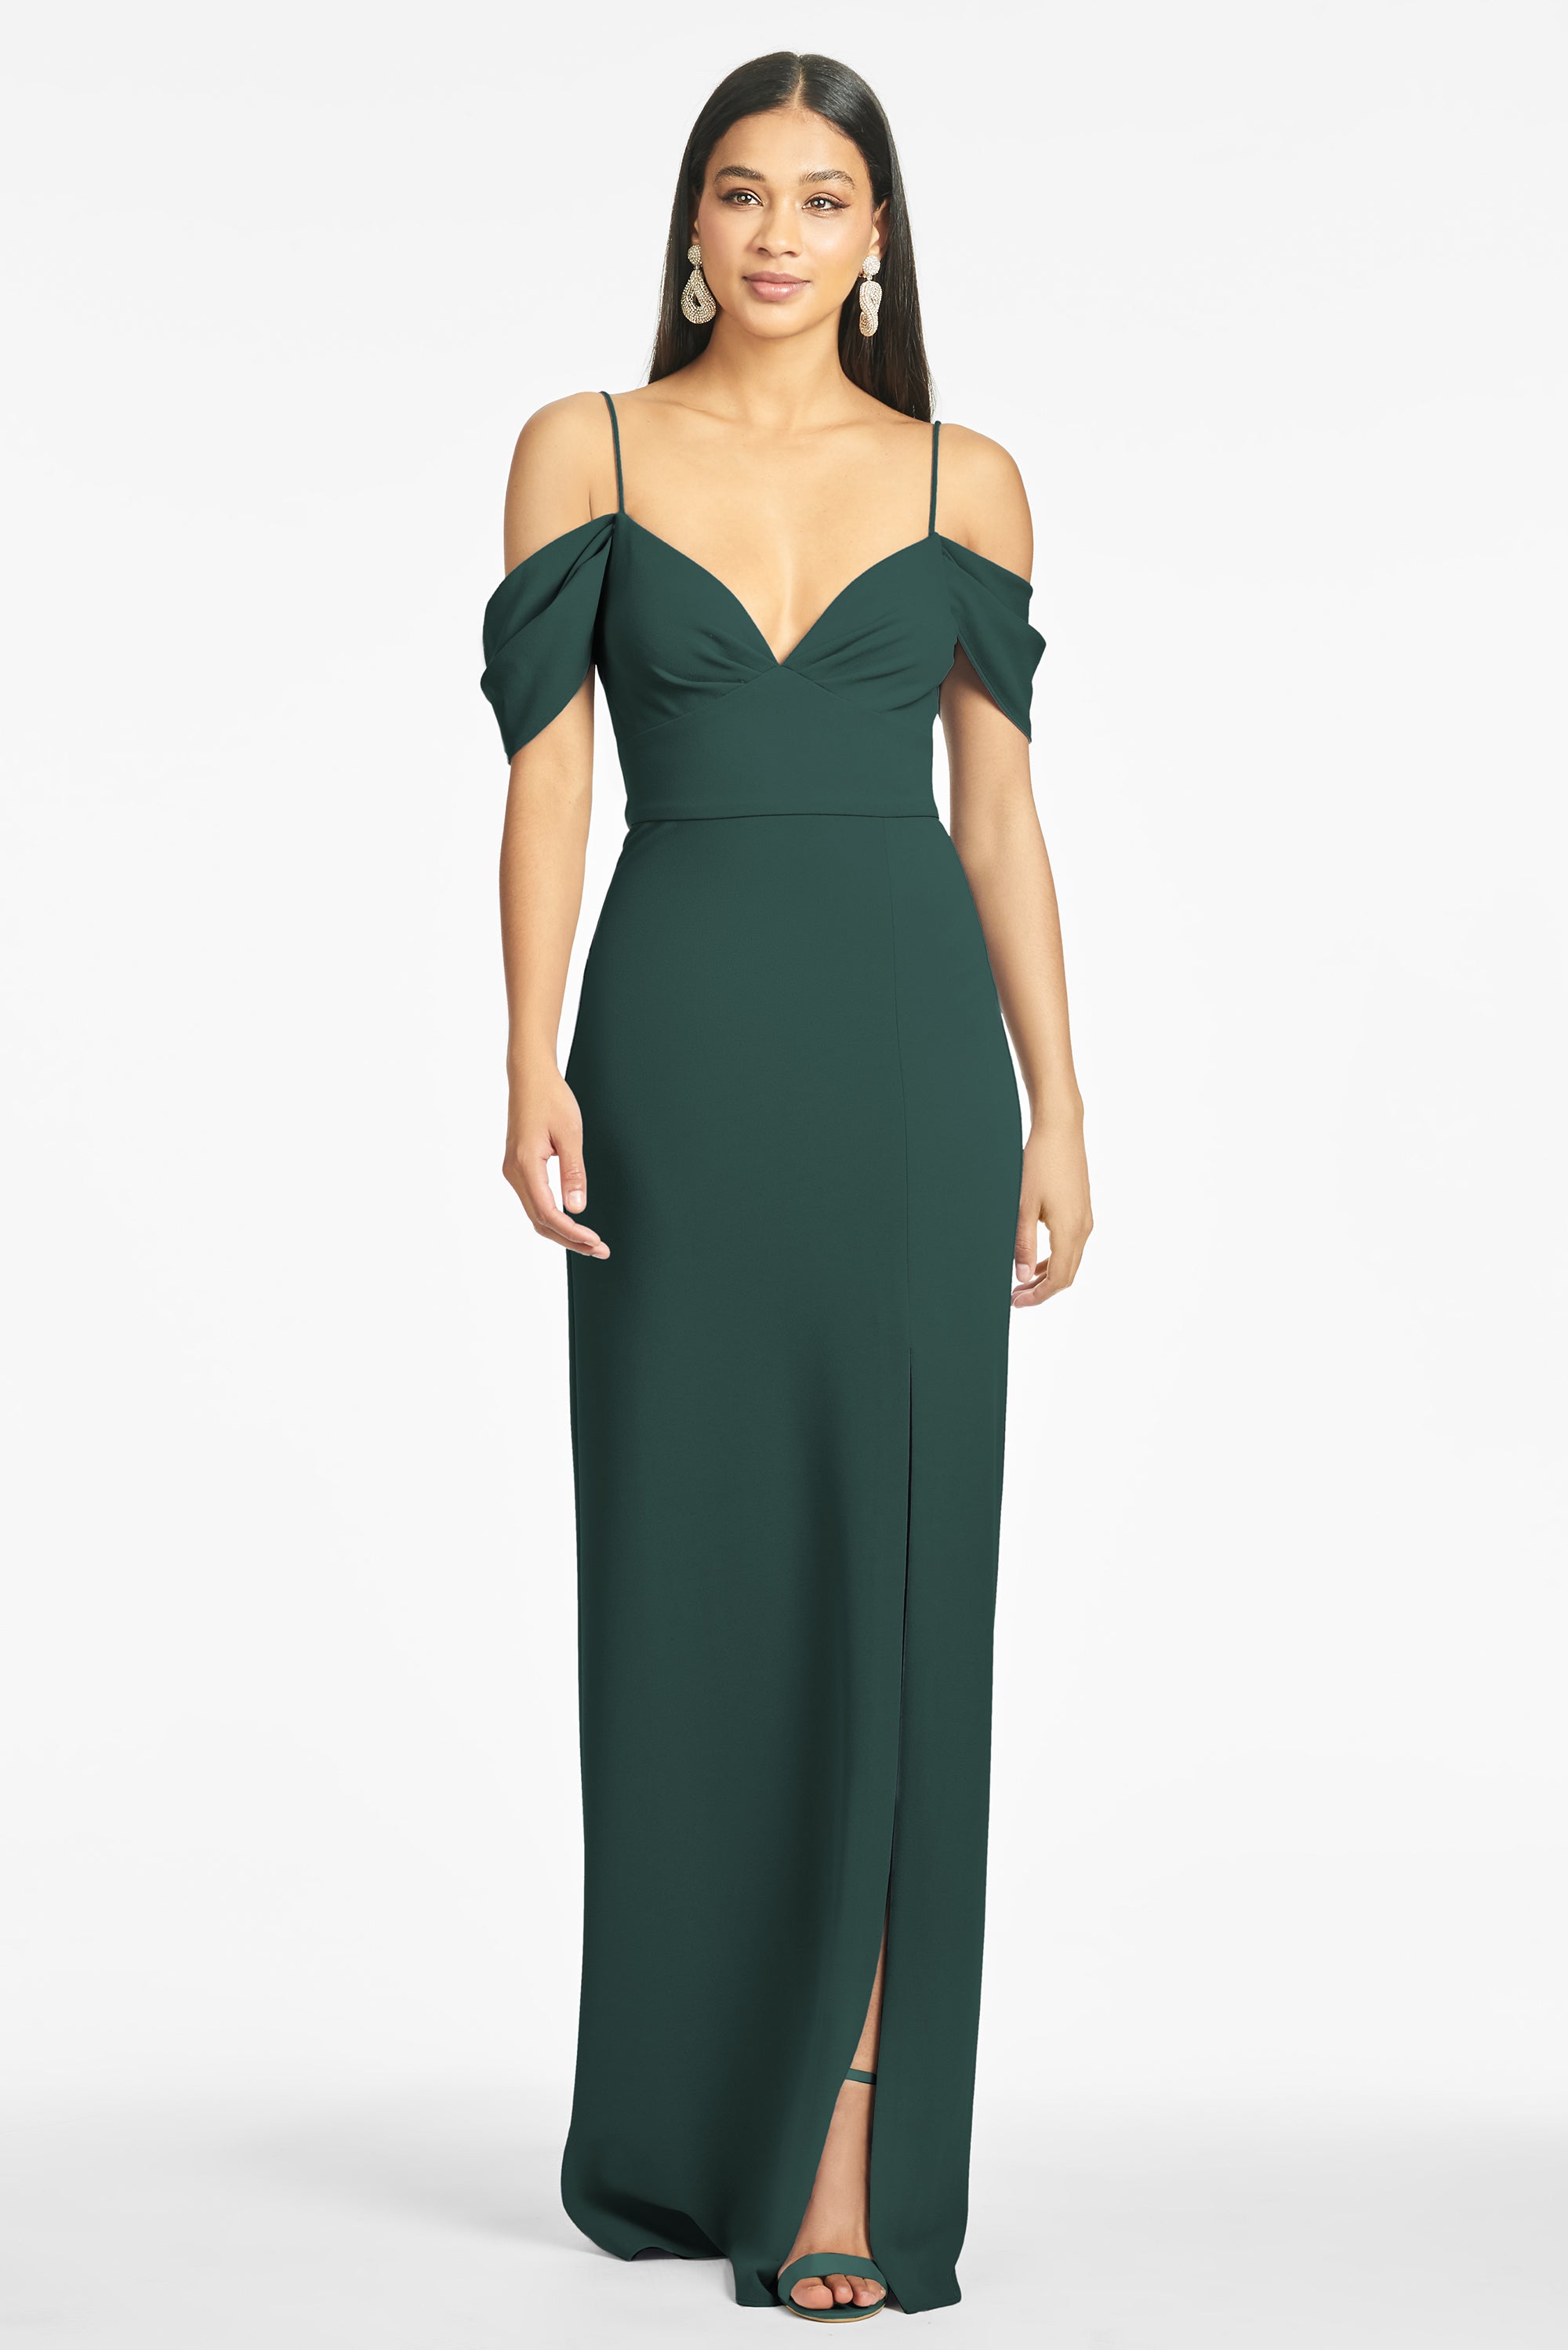 Brittany 4-Way Stretch Crepe Gown in Emerald - Sachin & Babi